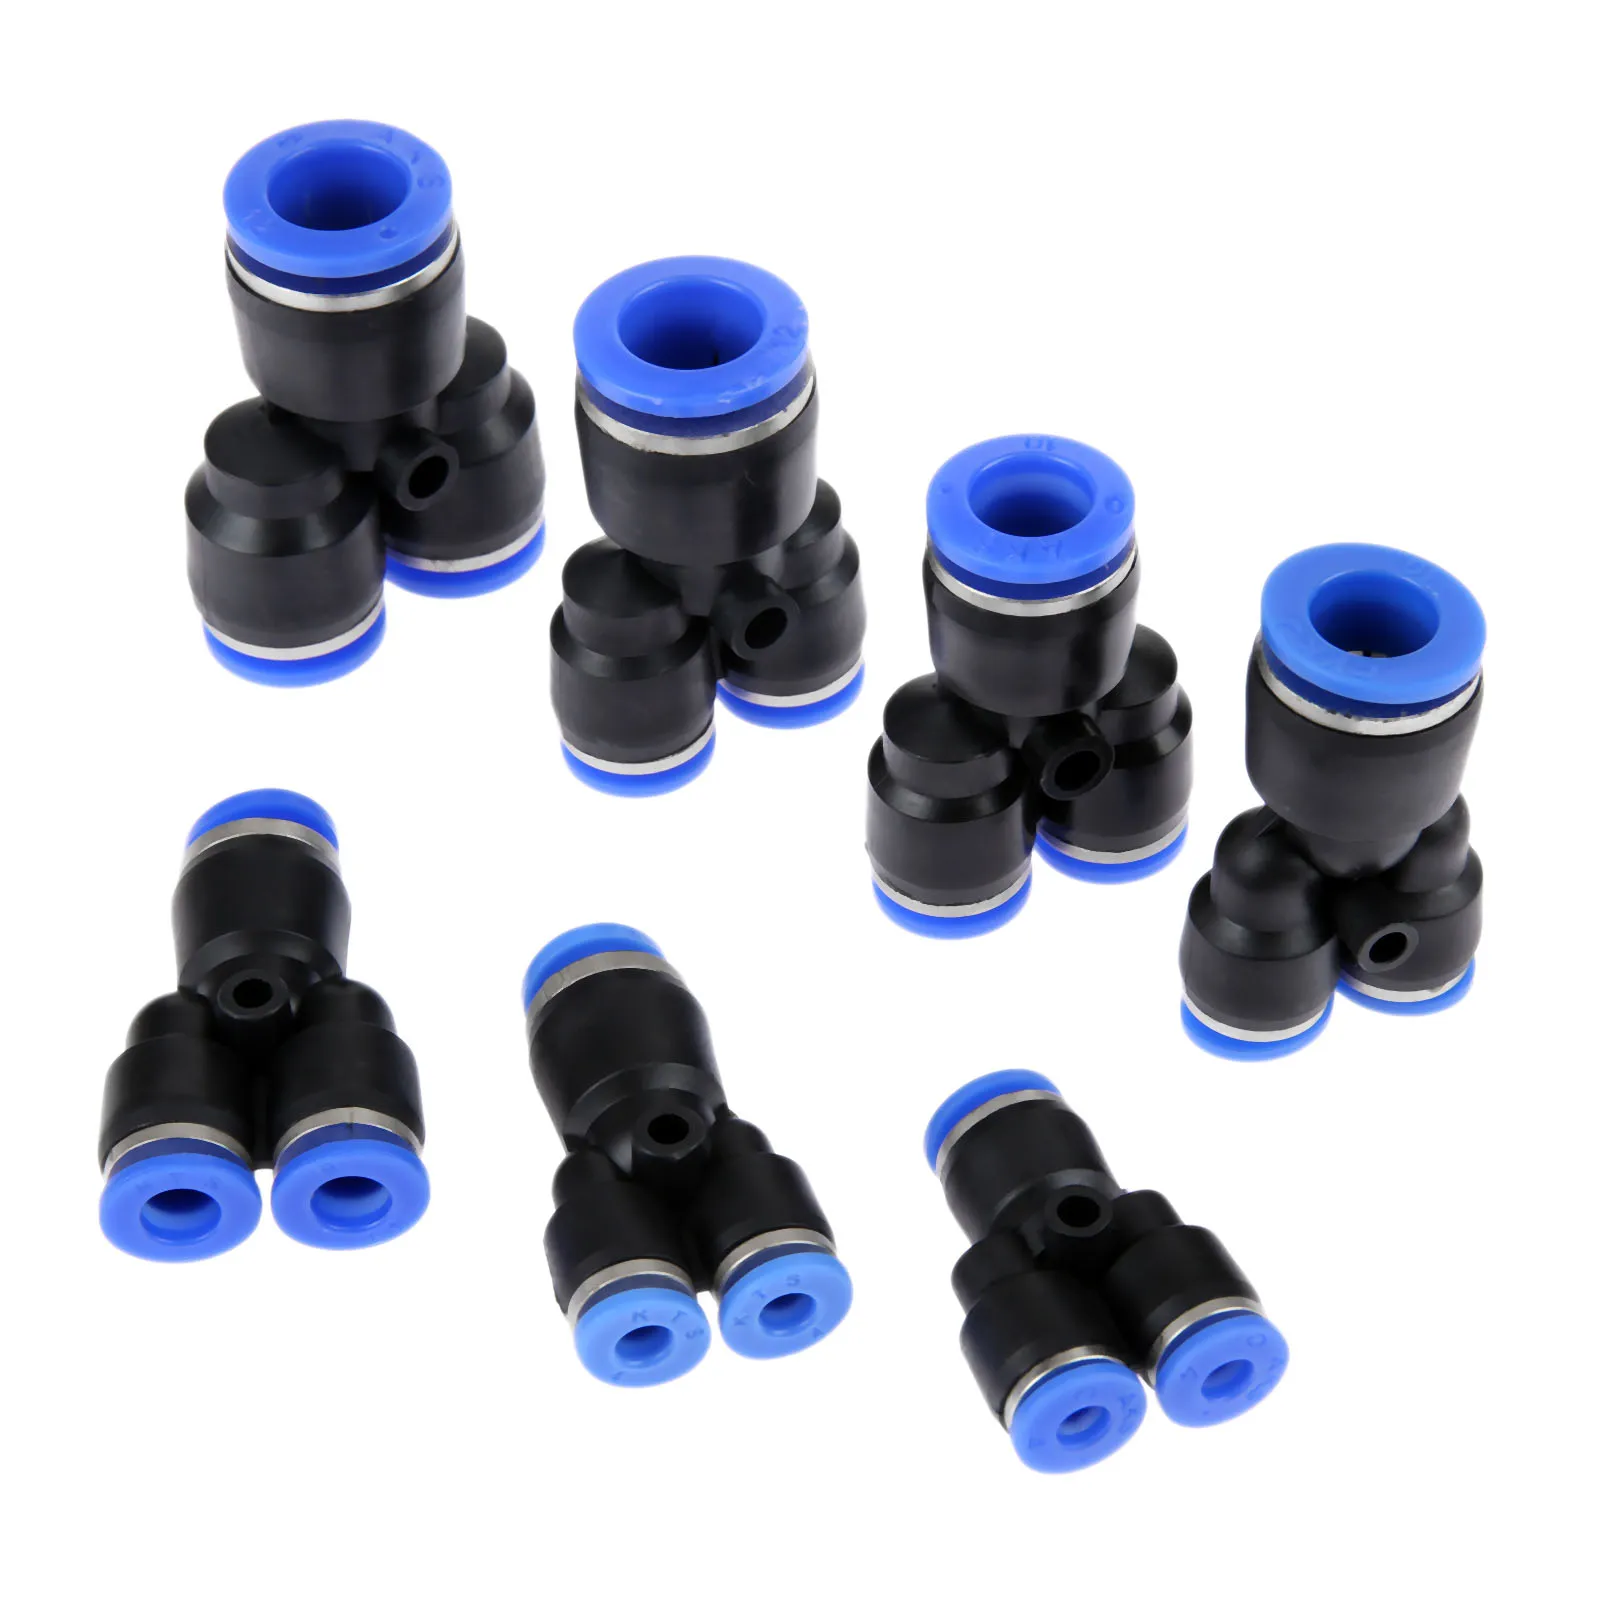 1/5Pcs 3 Way T-junction Pneumatic Fittings Connector for PE4 TO PE16 7 Sizes 